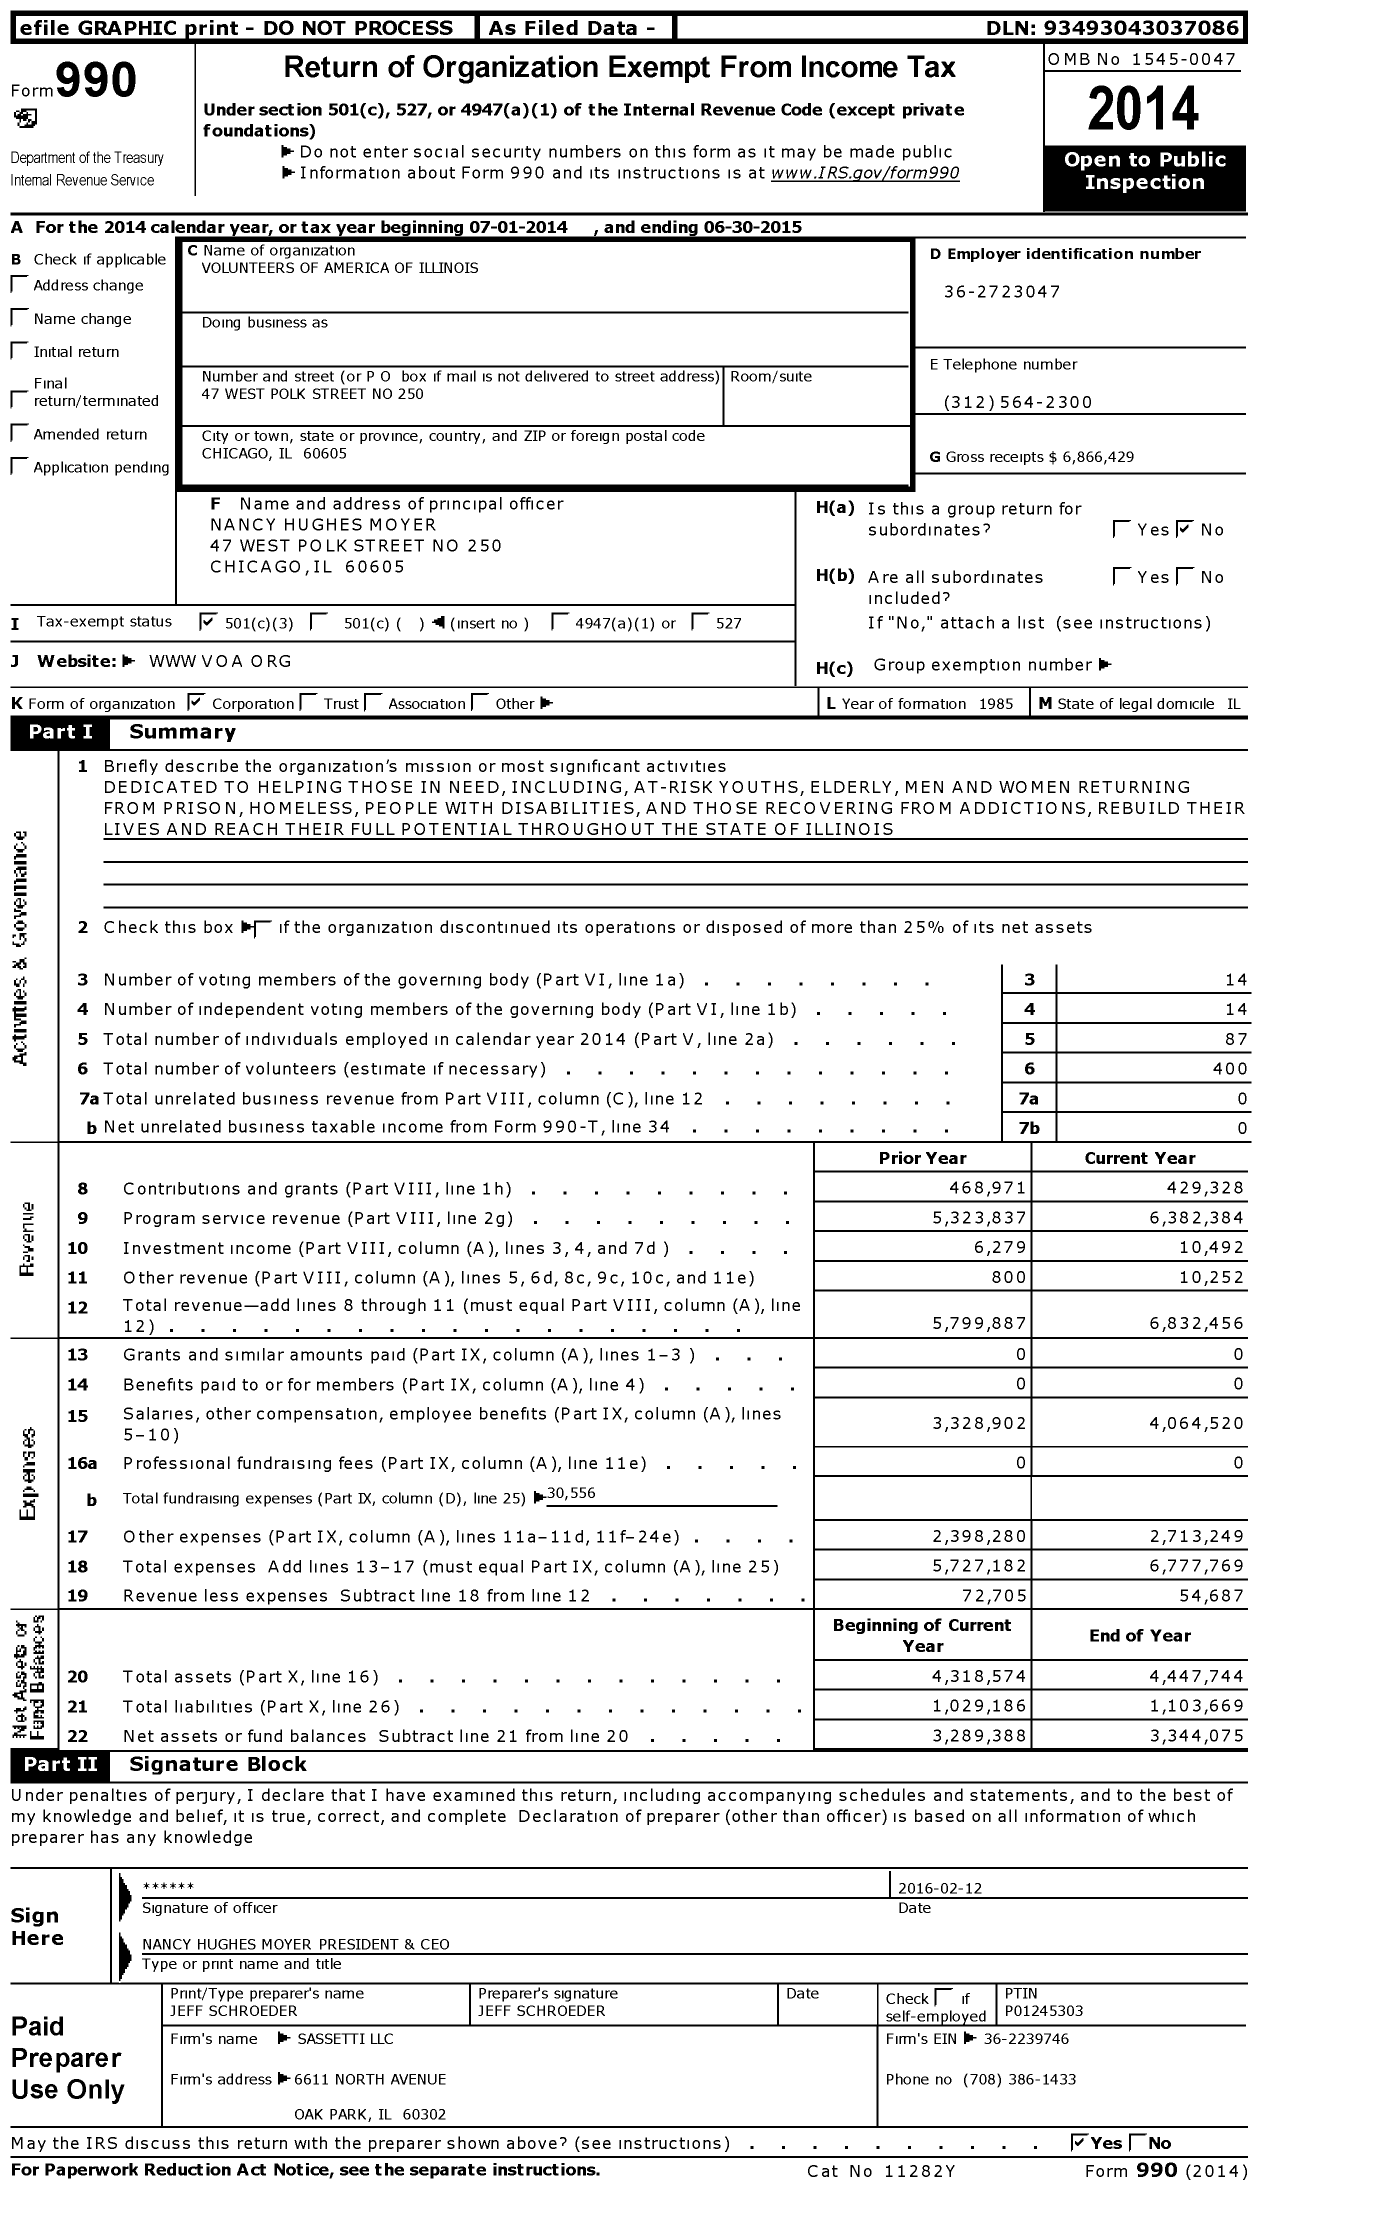 Image of first page of 2014 Form 990 for Volunteers of America of Illinois (VOA of IL)